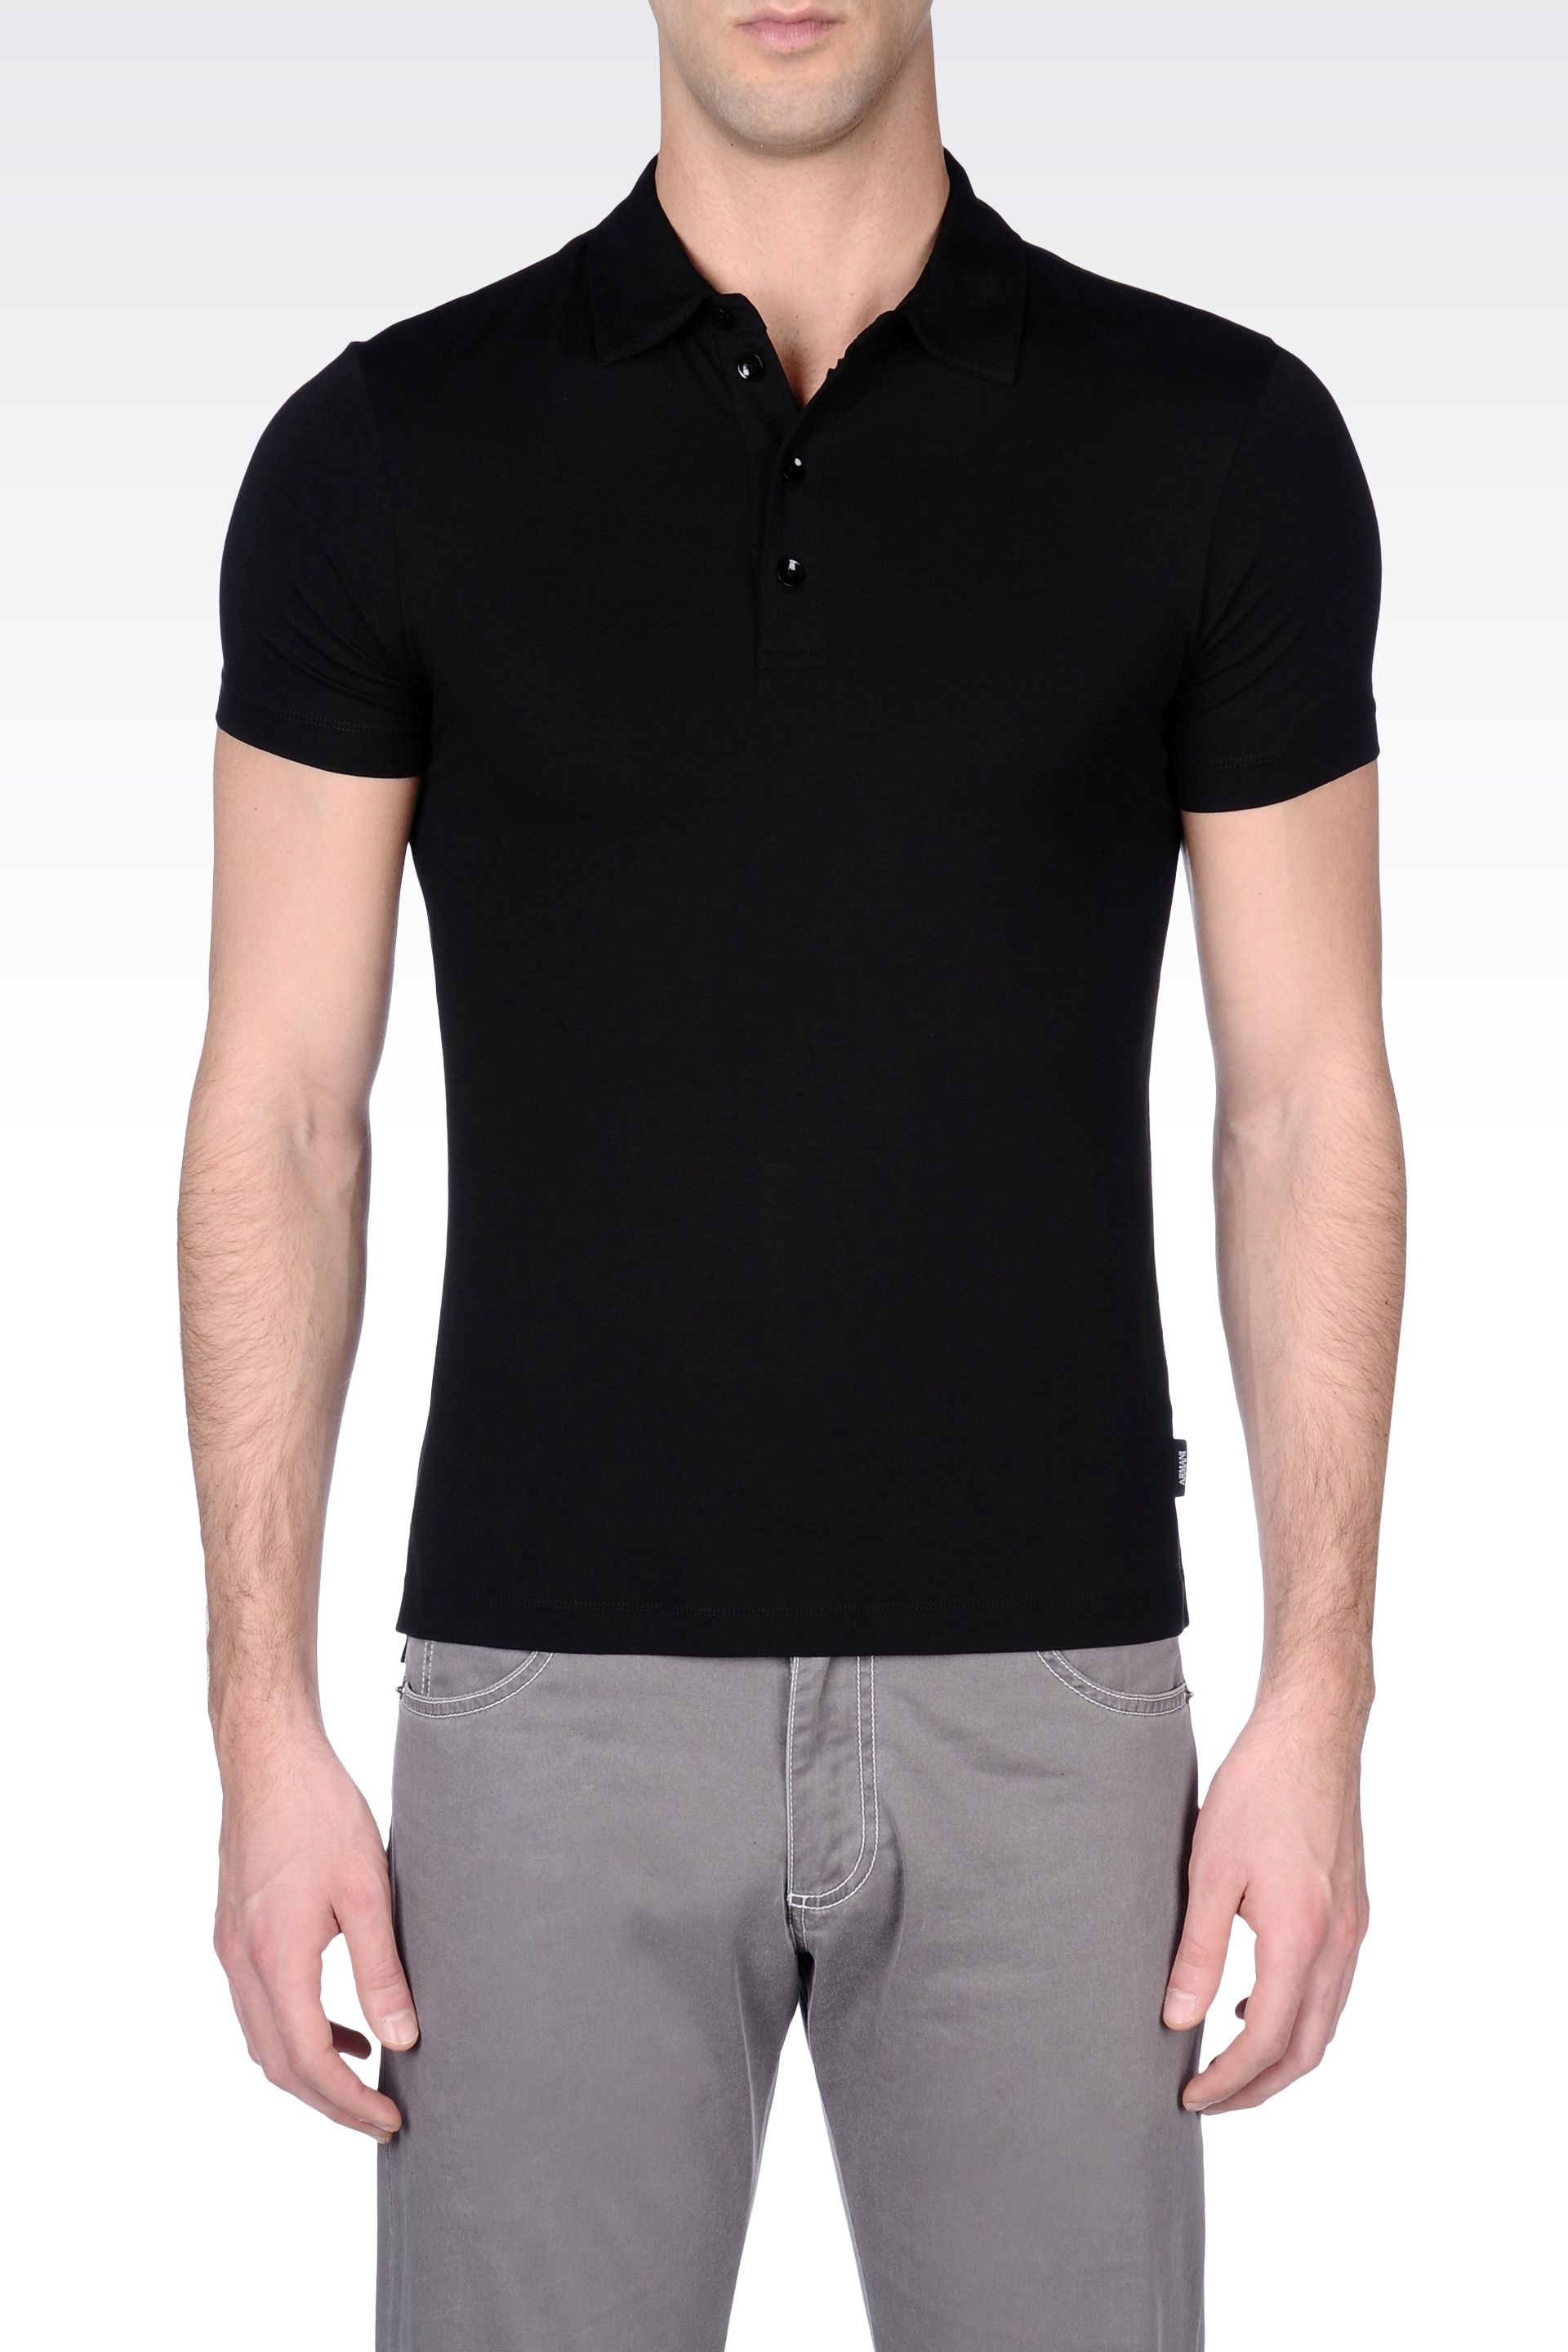 Lyst - Armani Viscose Jersey Polo Shirt in Black for Men